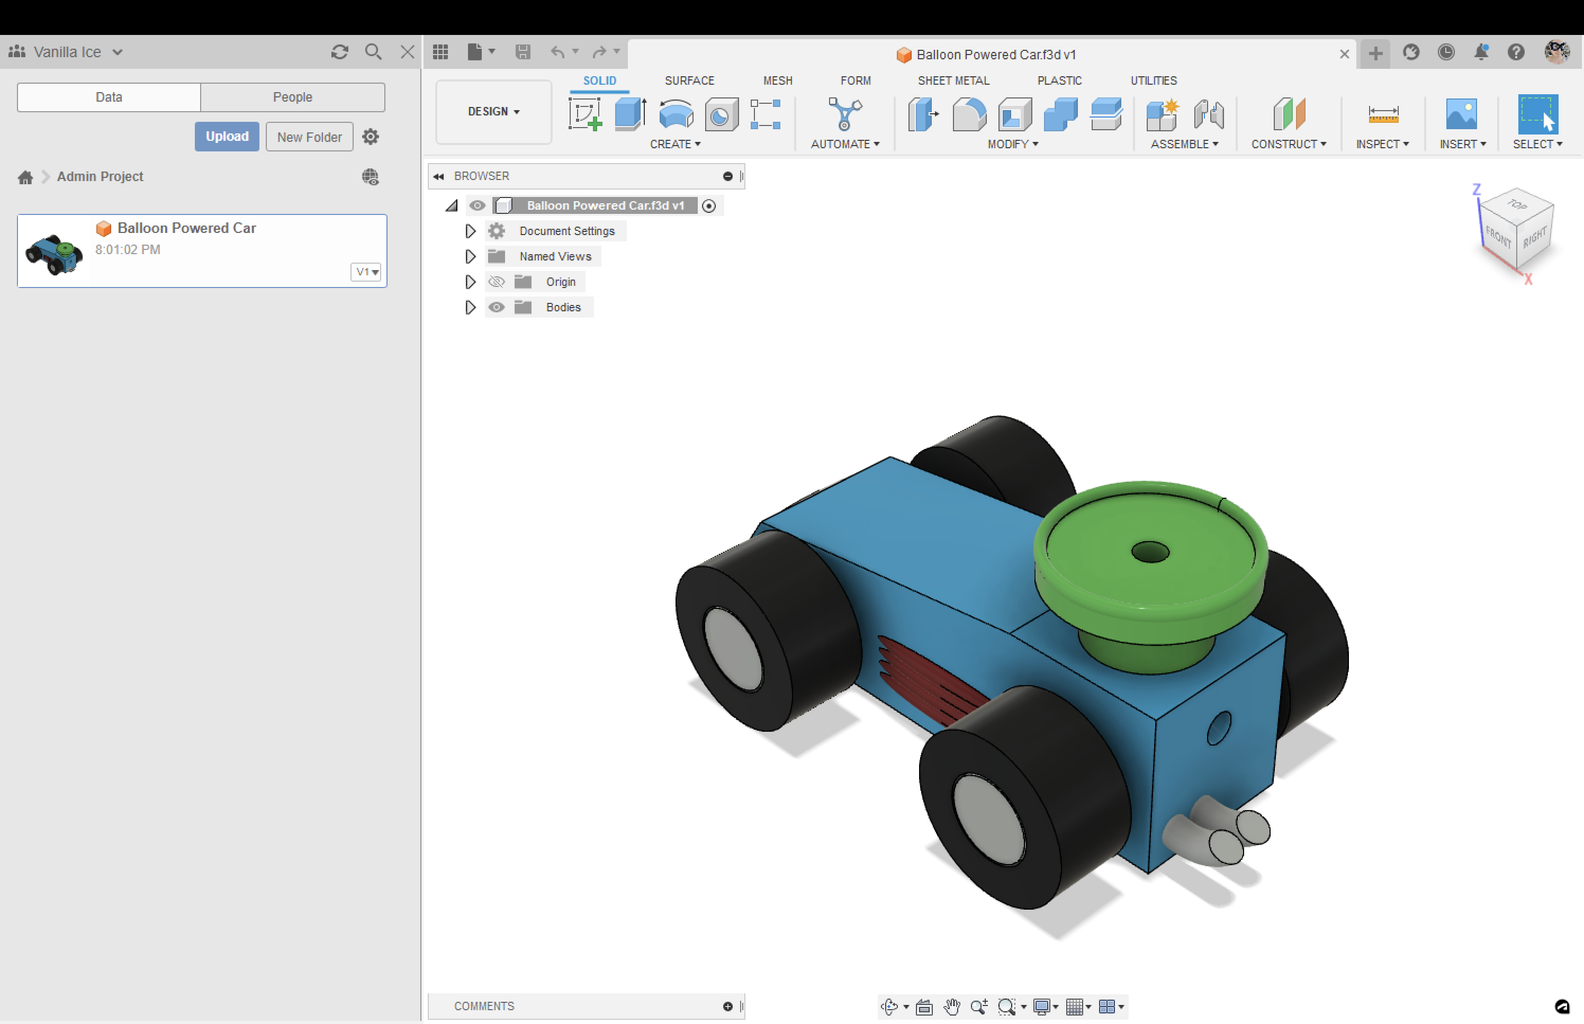 Open in Fusion Teams and Open Fusion 360 Browser App